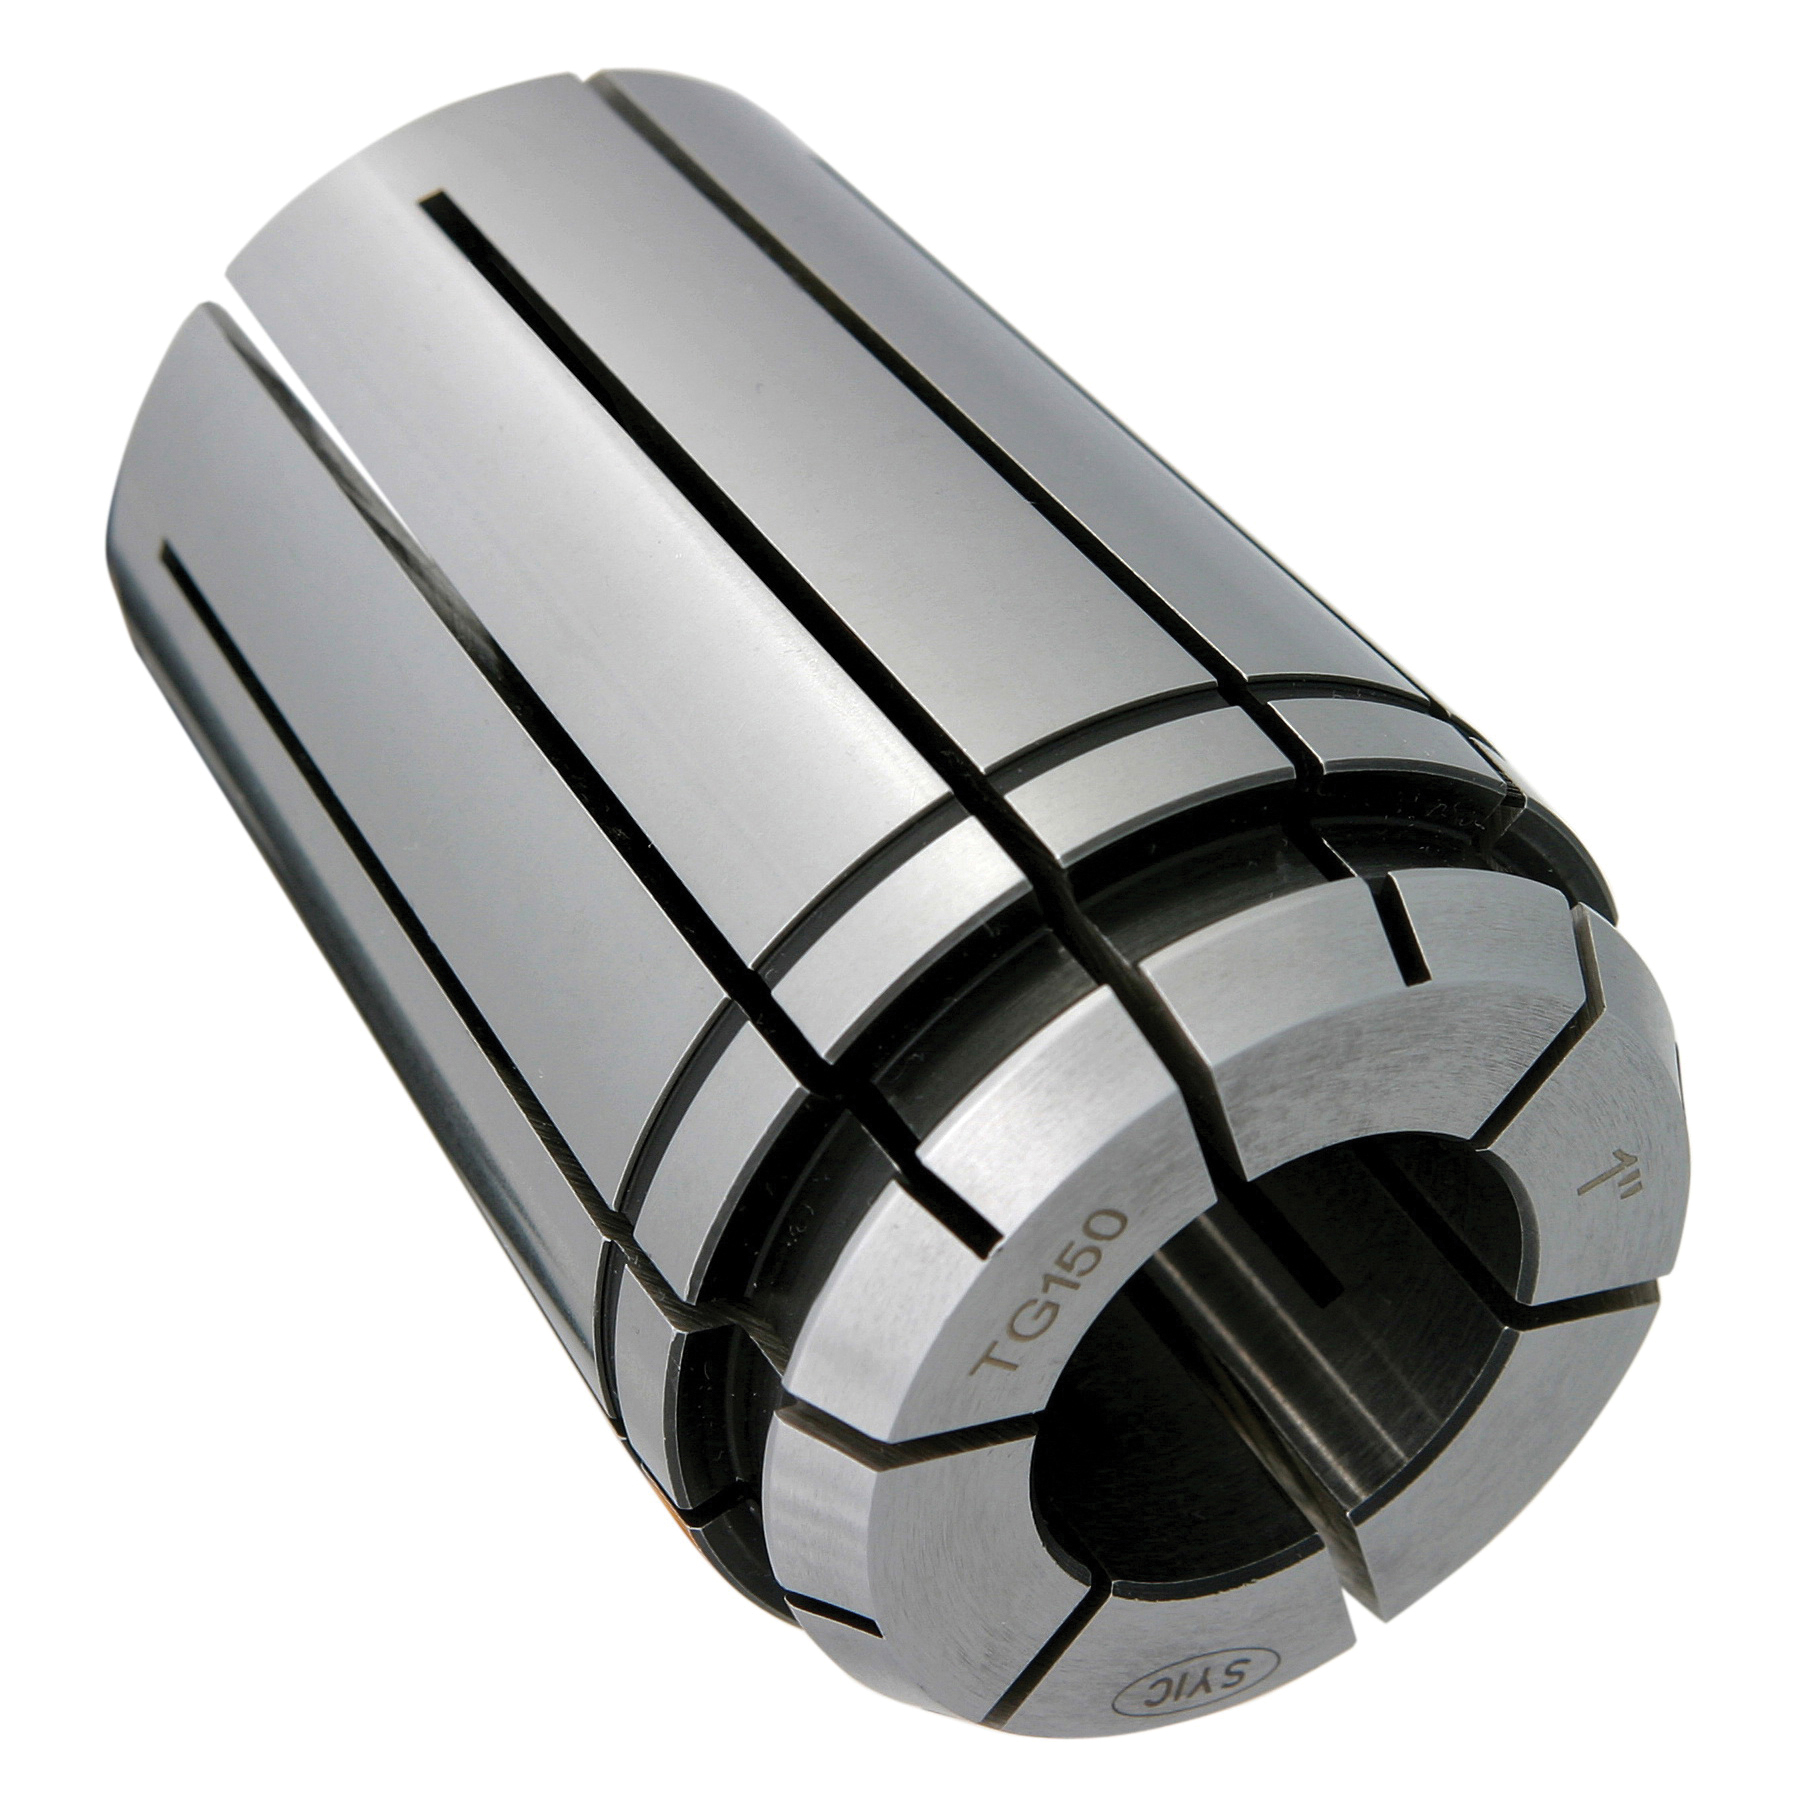 TG150 1-17/64" COLLET